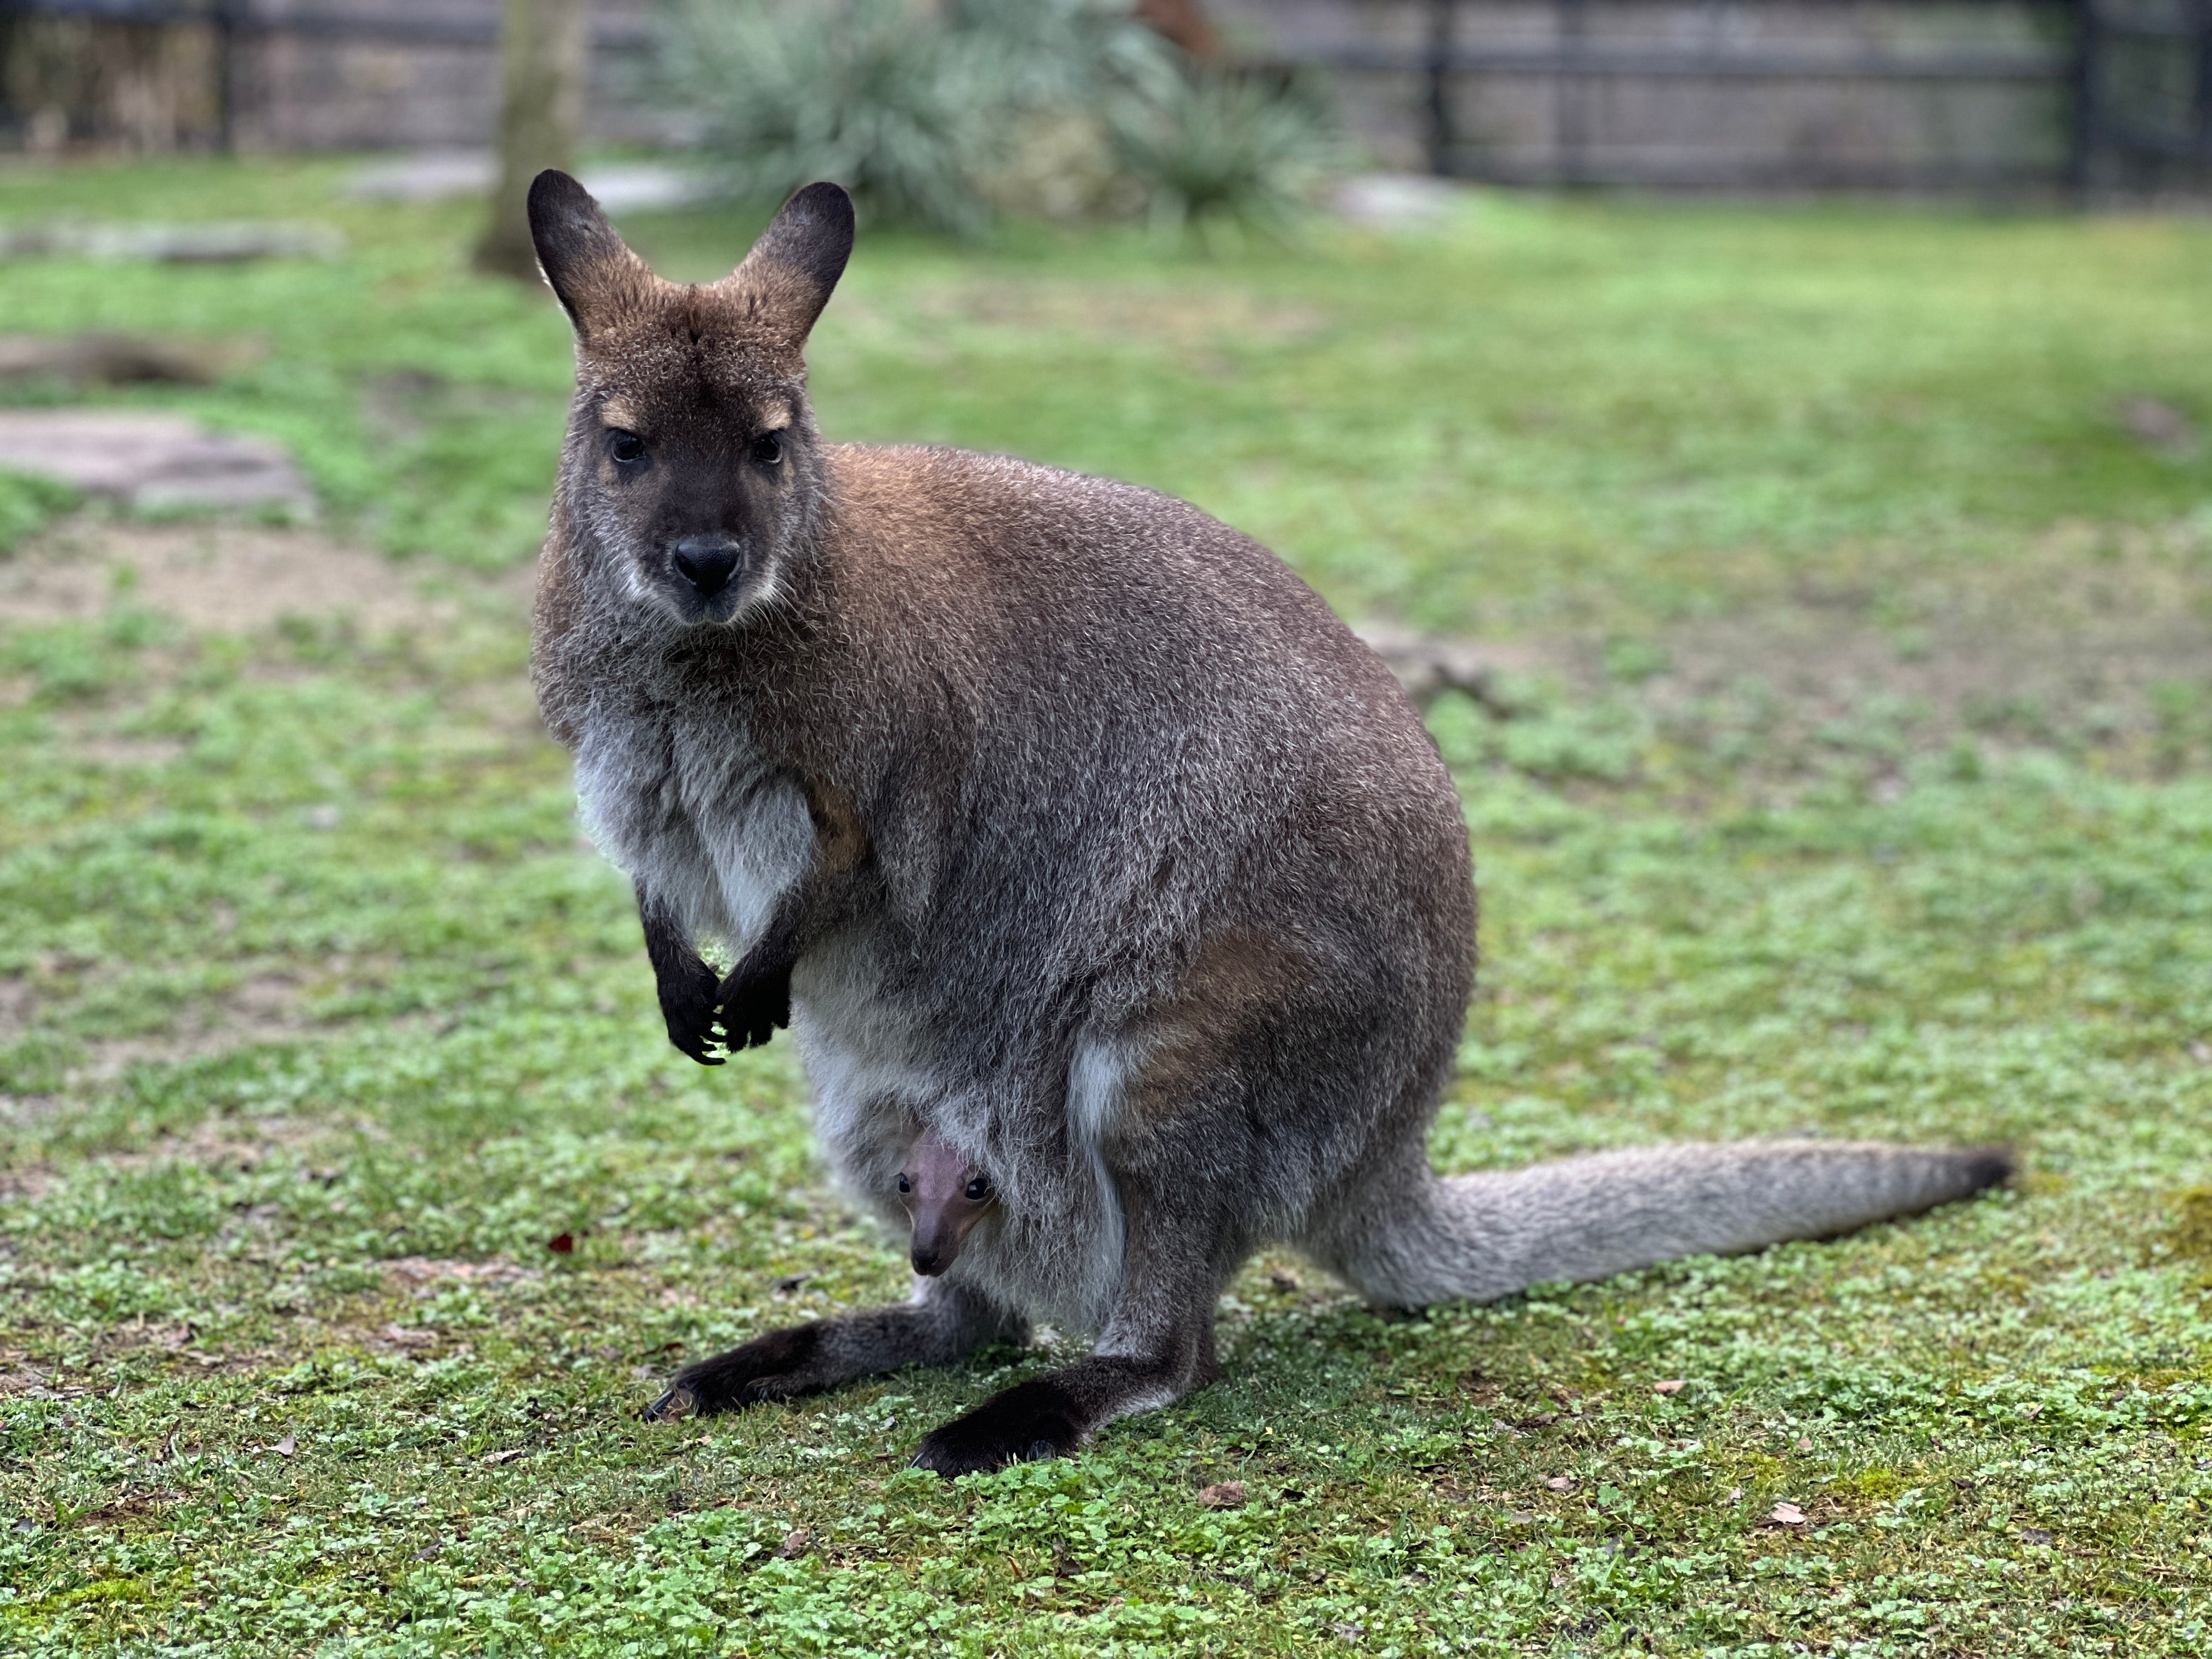 Photo of a female adult wallaby with a baby wallaby, also known as a joey, peeking out of her pouch.